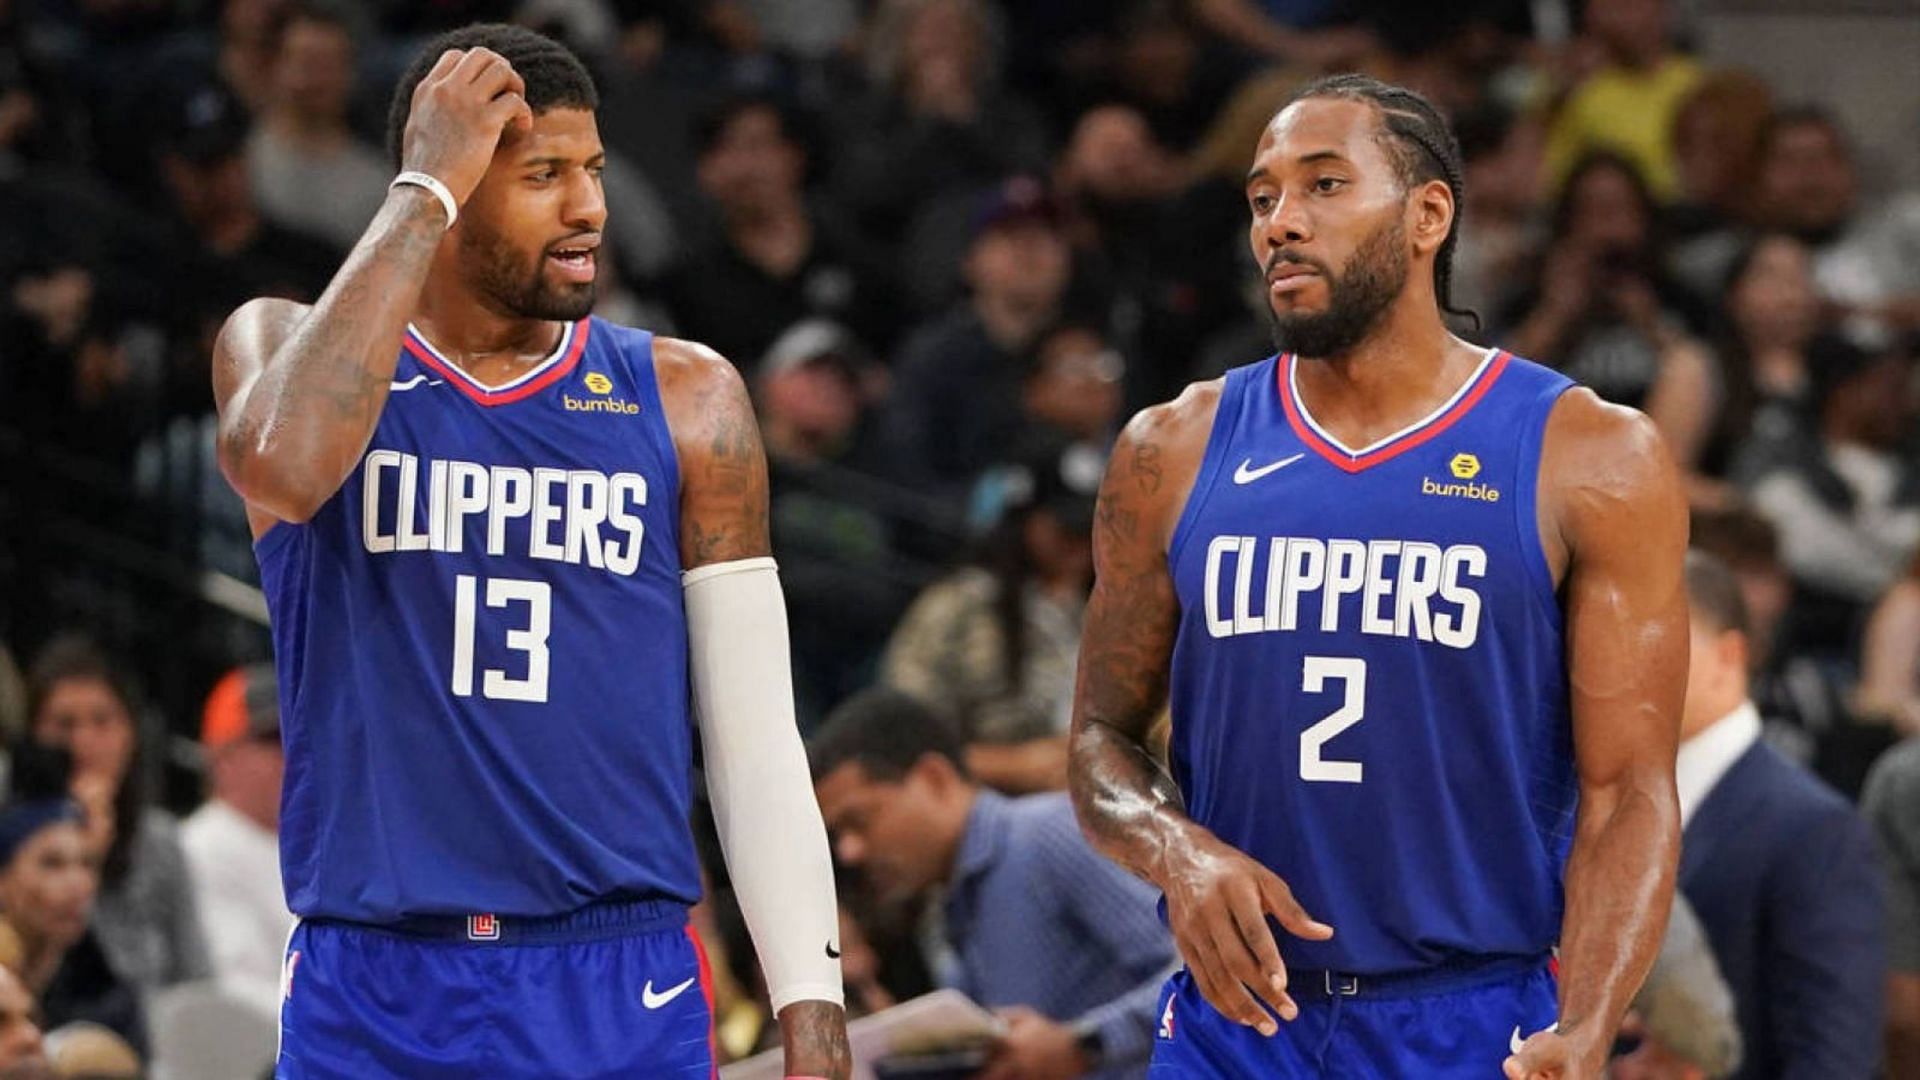 LA Clippers vs Minnesota Timberwolves starting lineups and depth chart